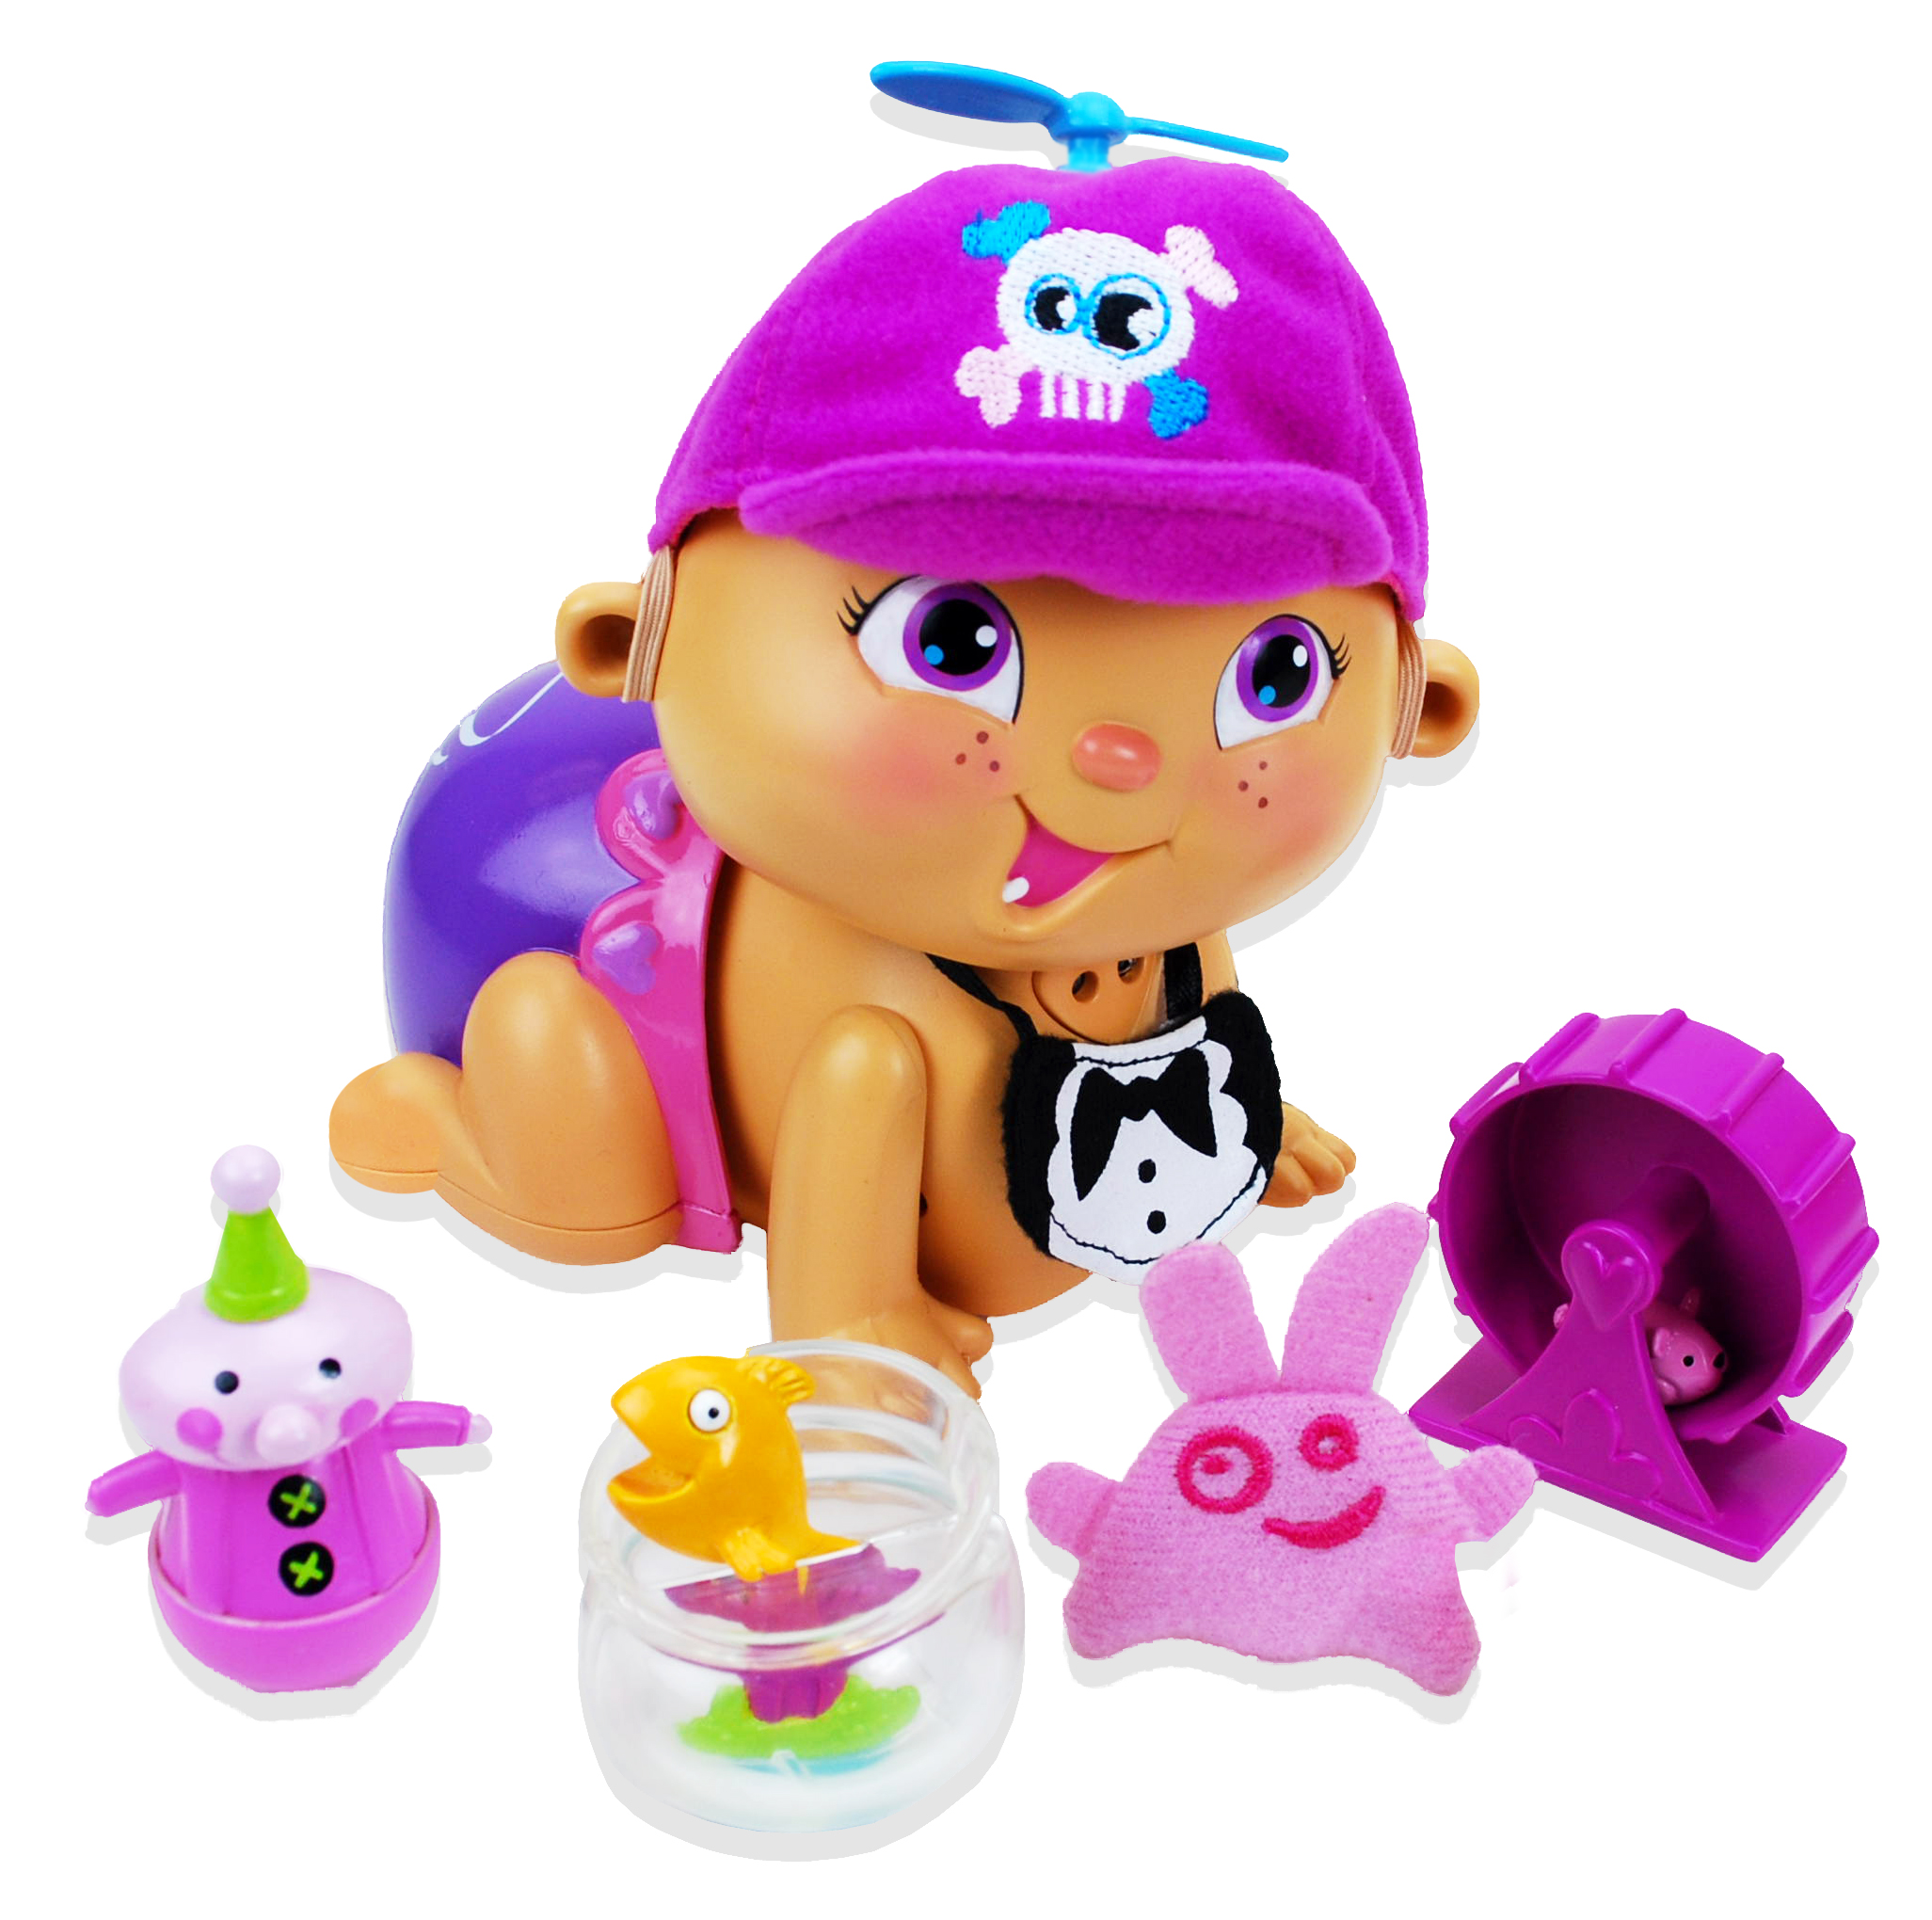 Ding-e- Babies Accs Sets - Play Date